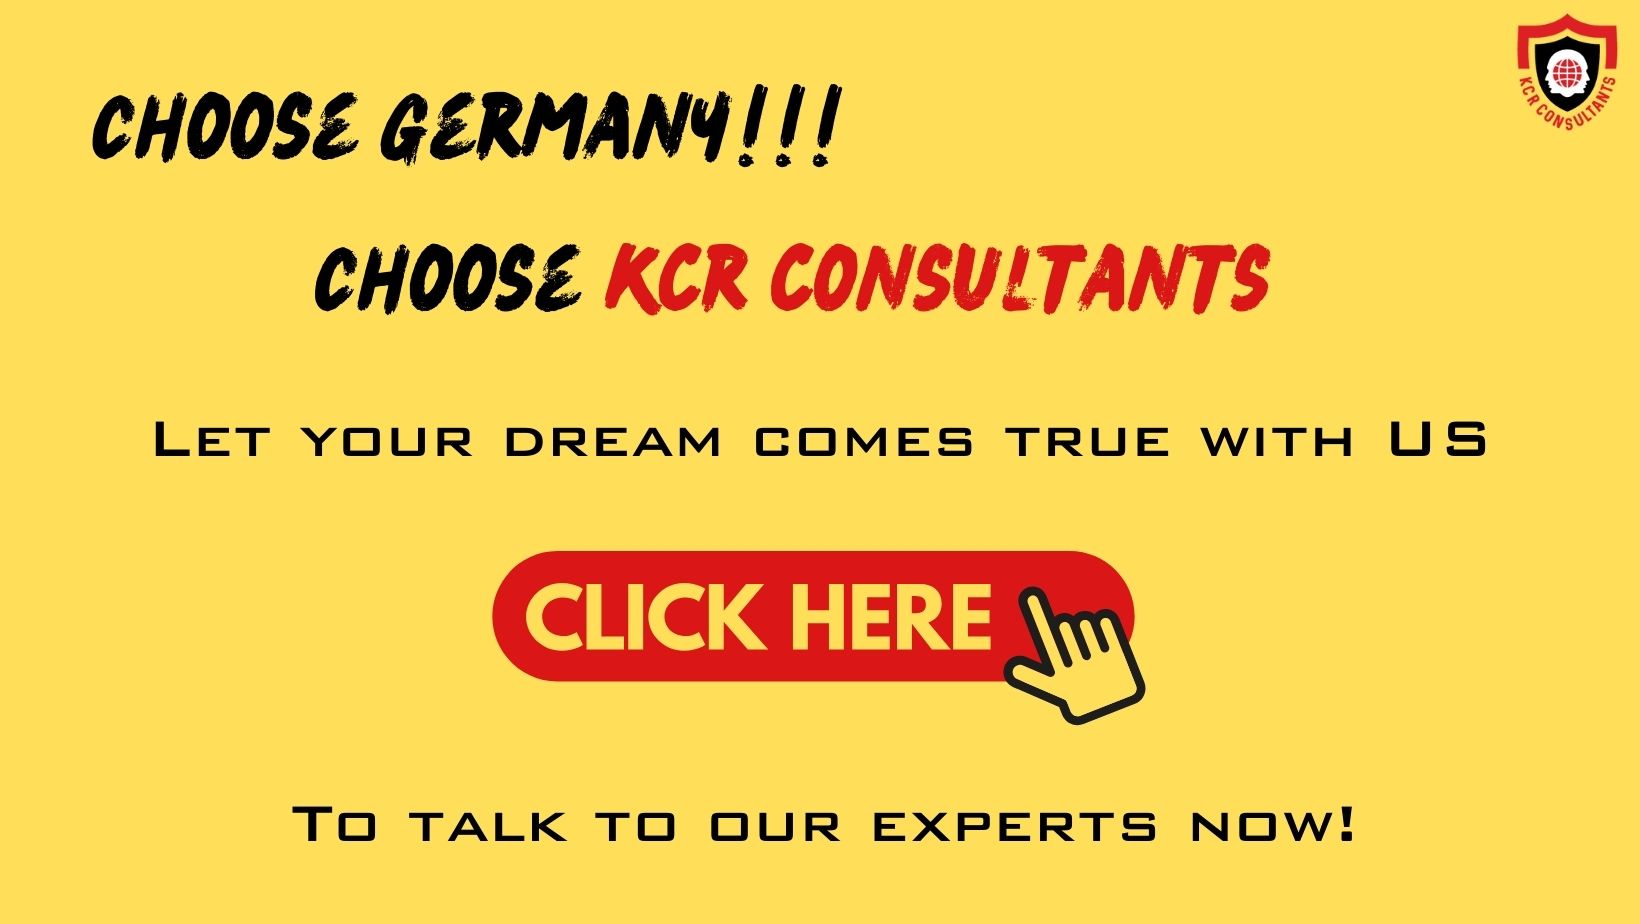 STUDY IN GERMANY - KCR CONSULTANTS - Contact us